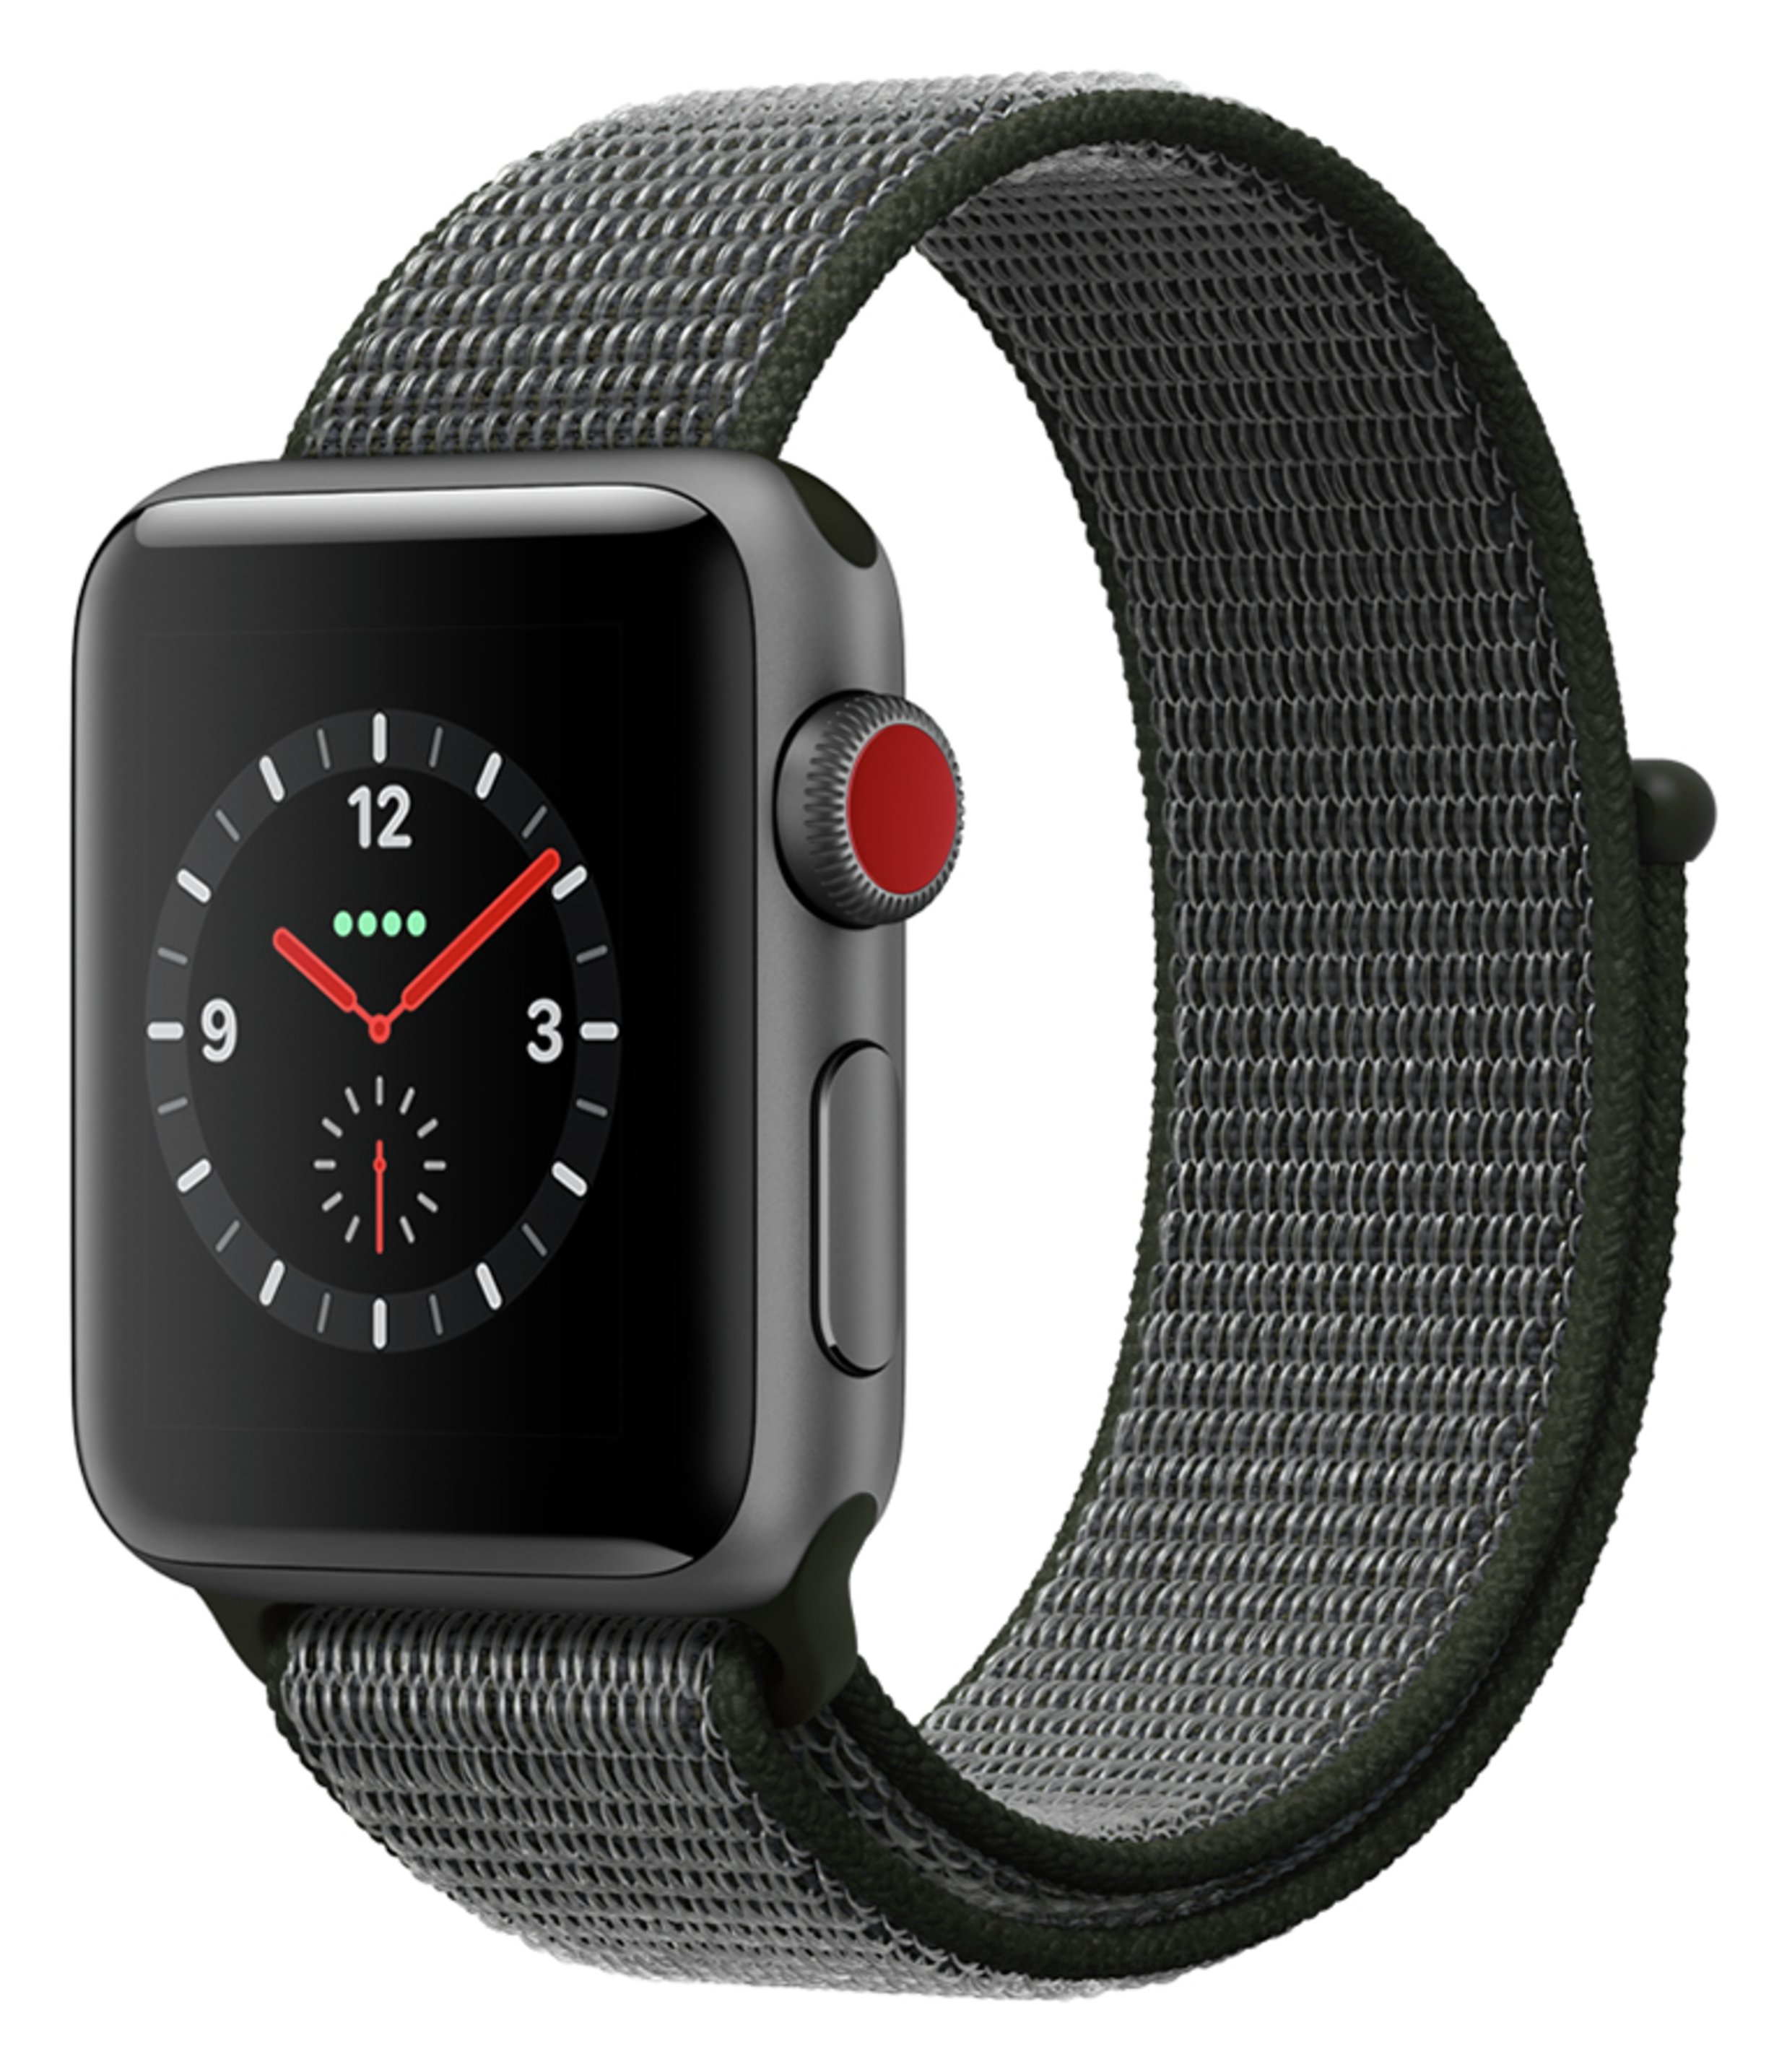 Apple Watch S3 Cellular 42mm Reviews